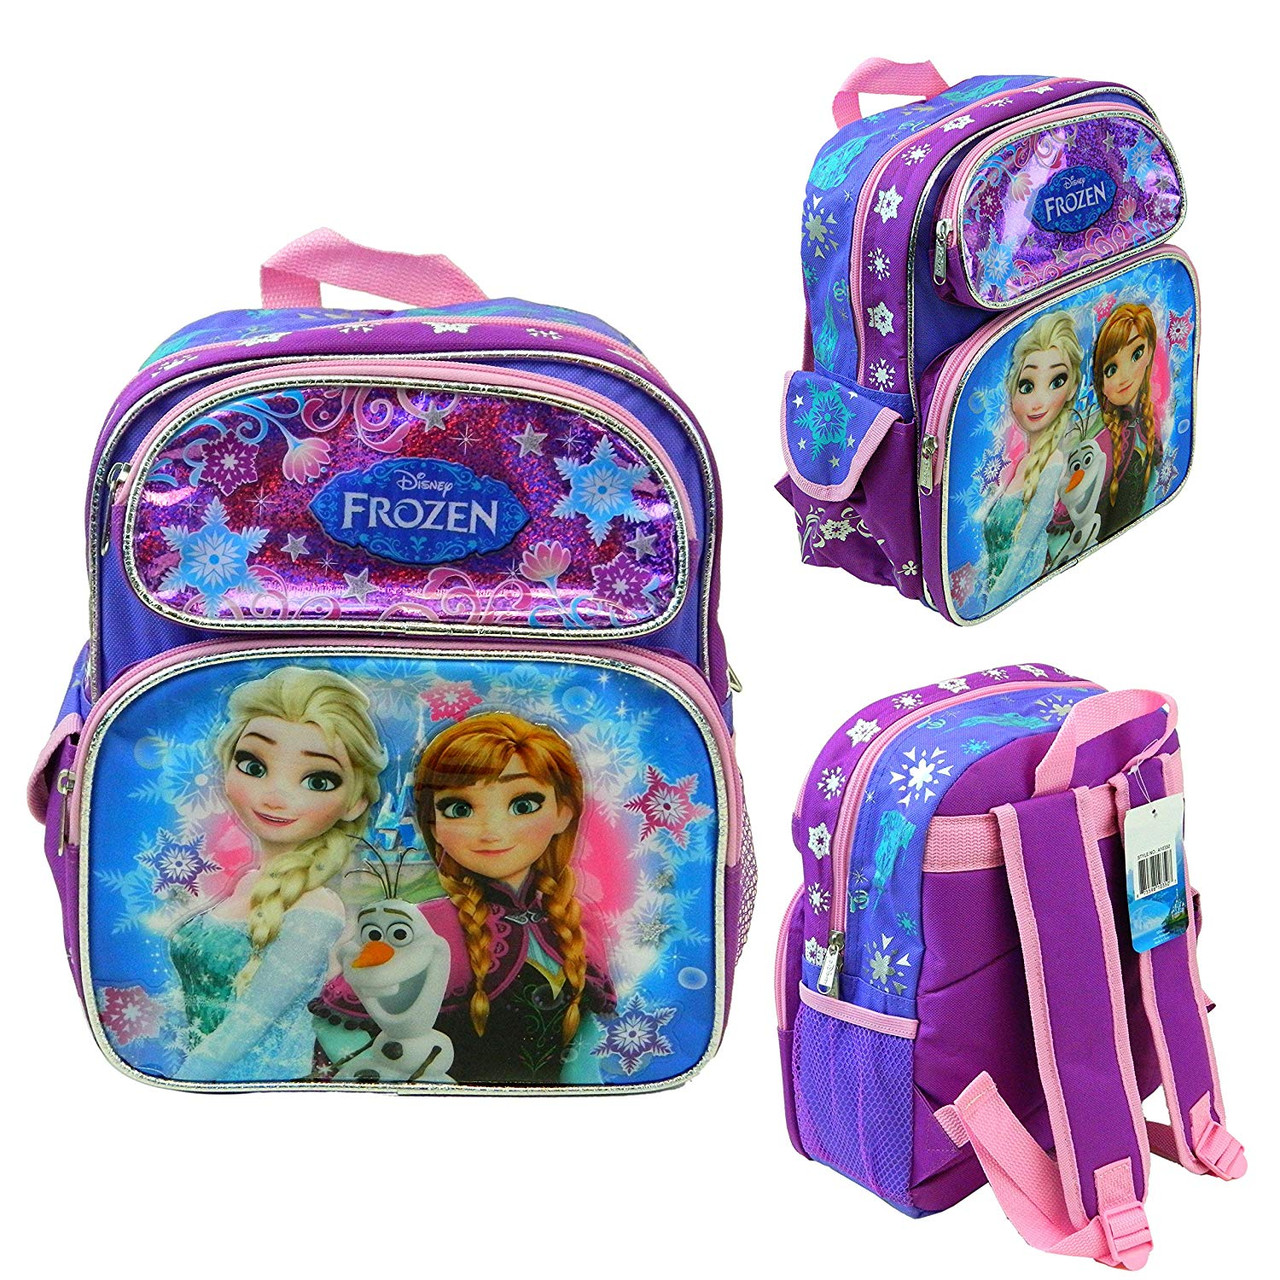 Disney Frozen Olaf 12" Backpack BRAND NEW Licensed Product 